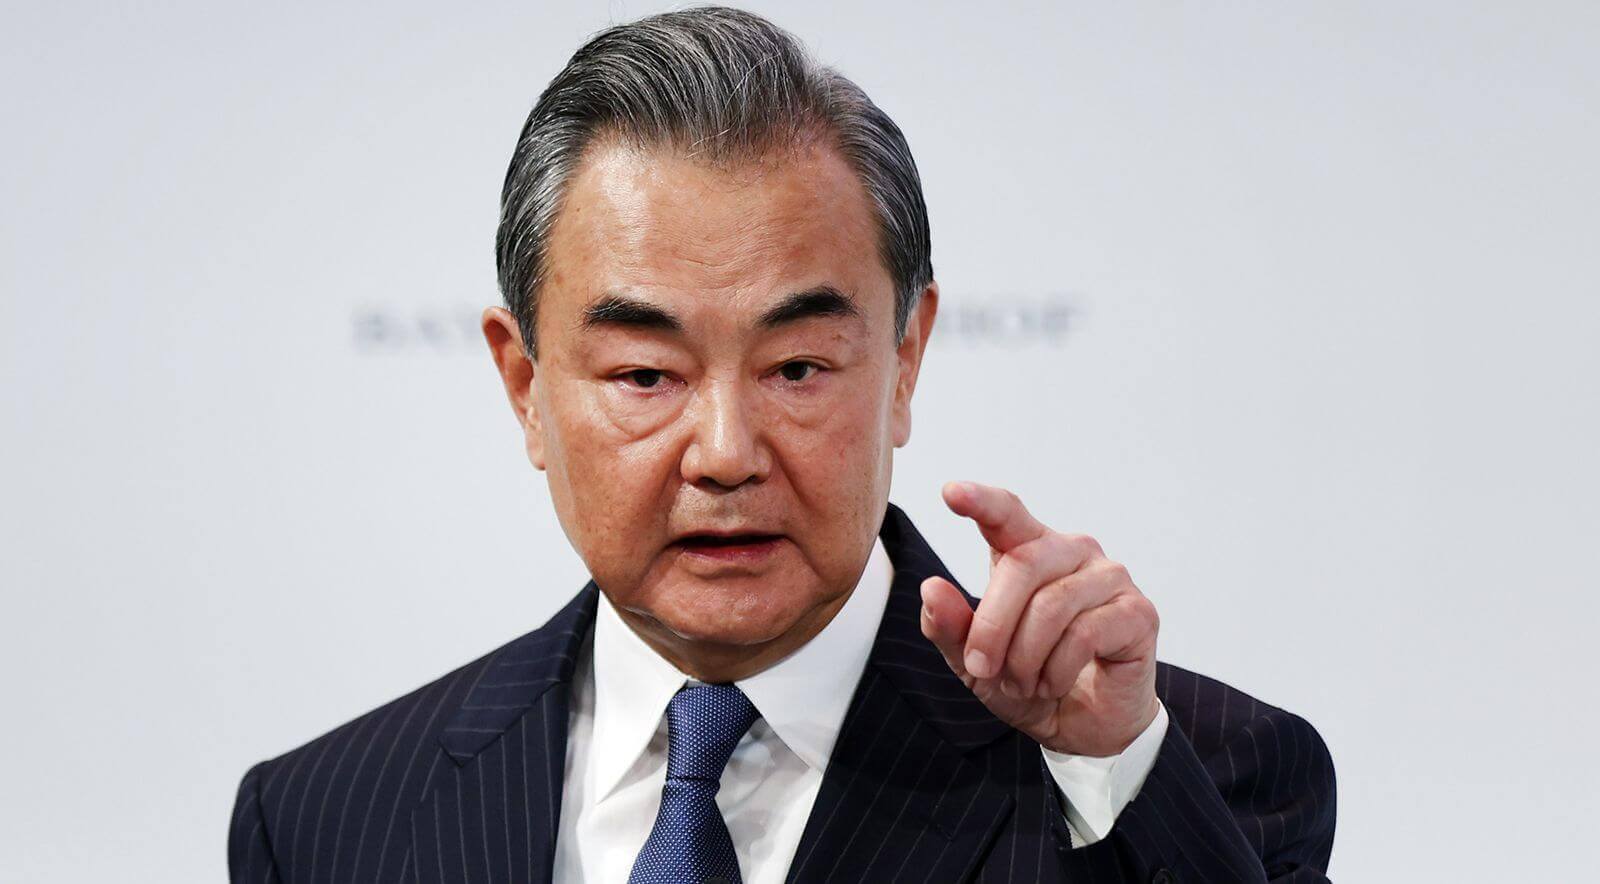 US Efforts to Strengthen Cooperation with India and Weaken China “Doomed to Fail”: Wang Yi